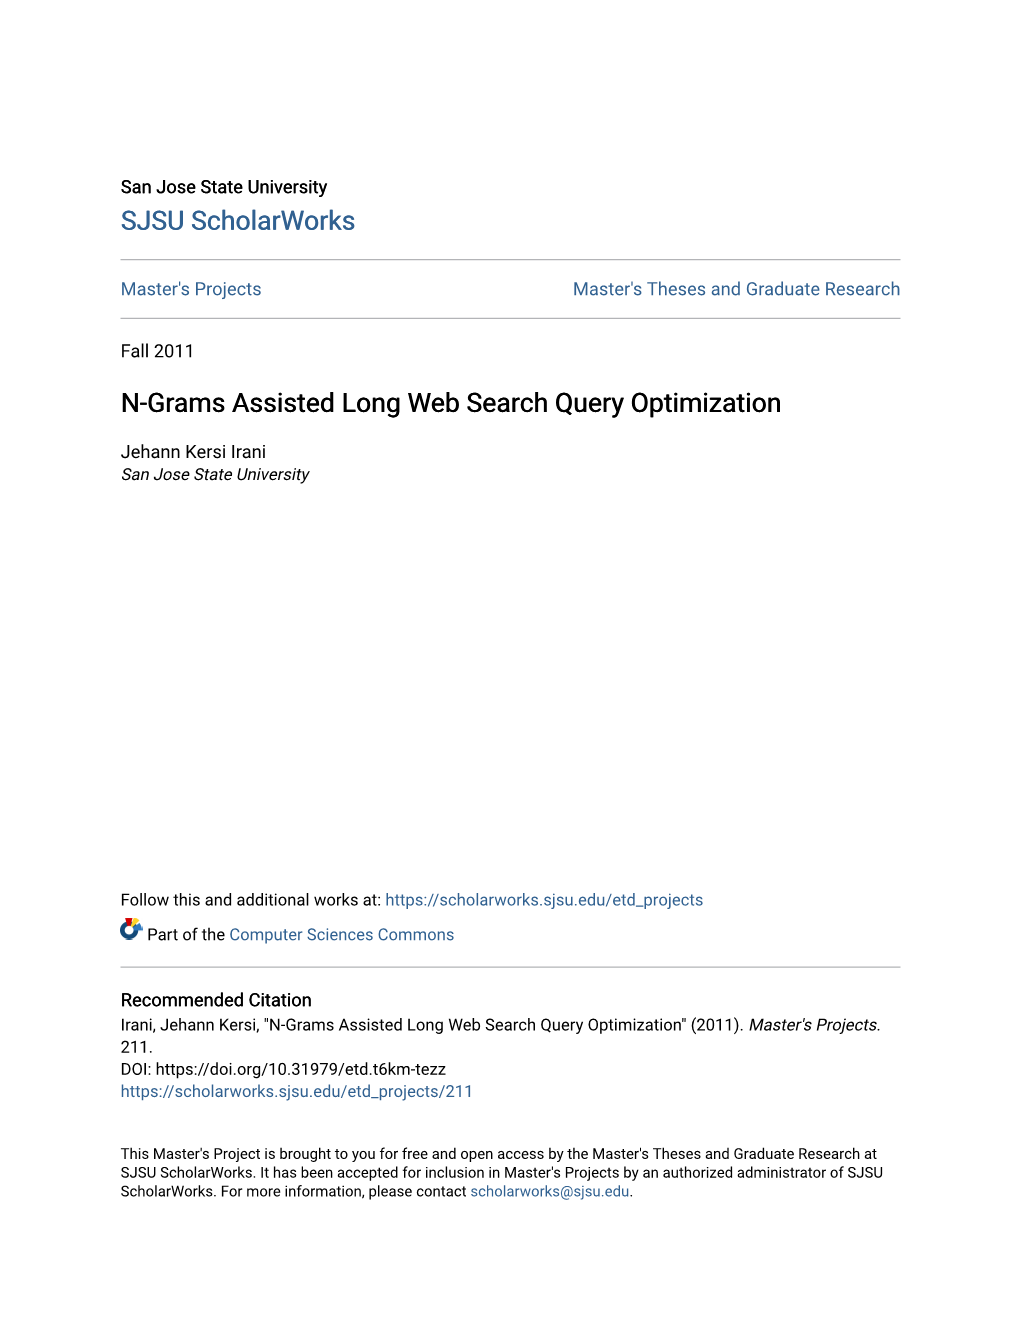 N-Grams Assisted Long Web Search Query Optimization